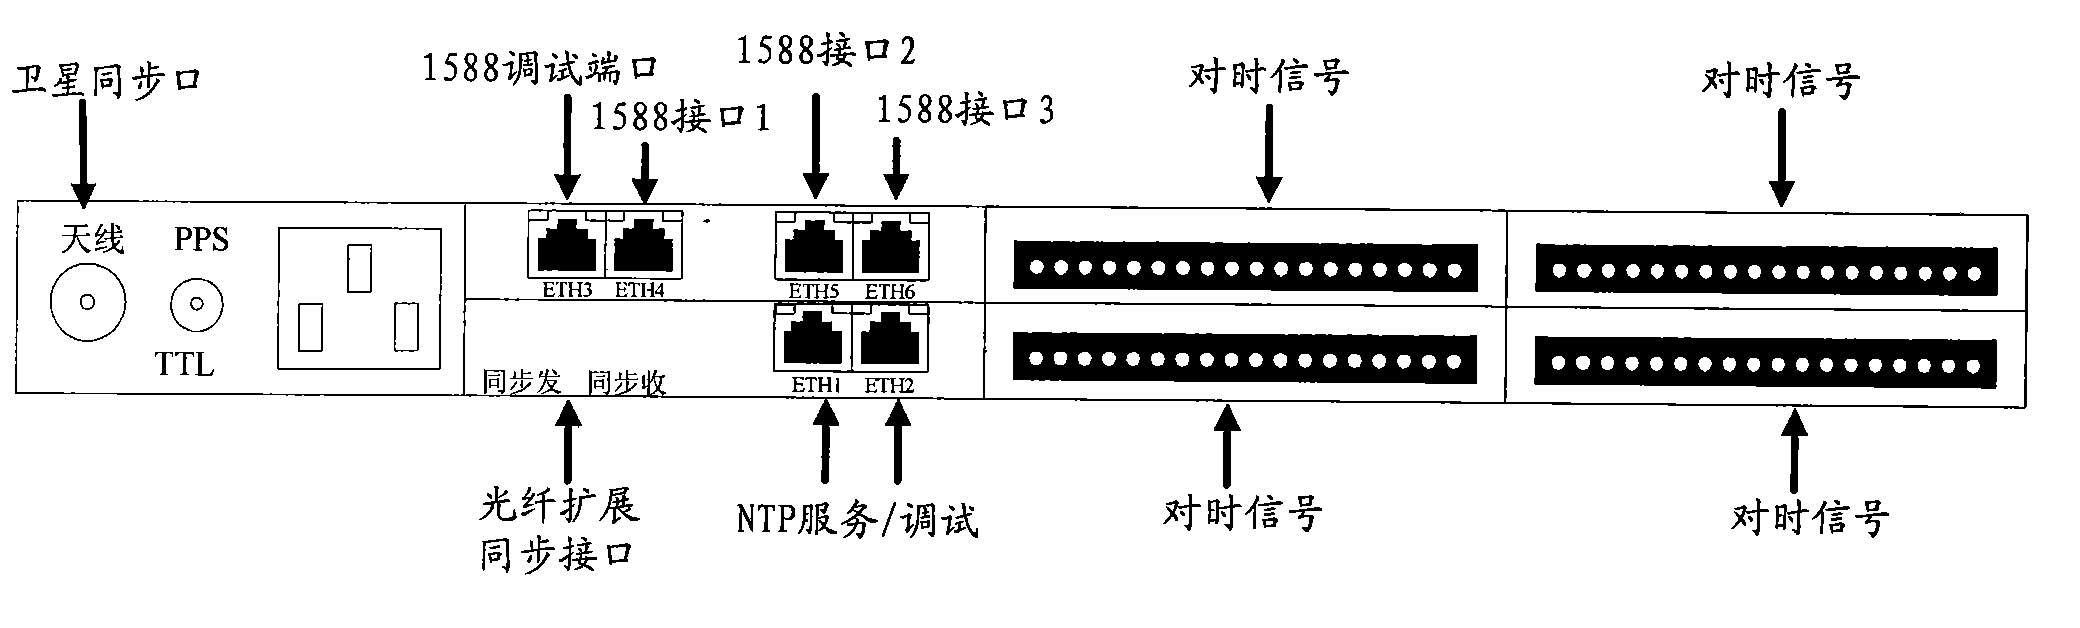 High-precision Ethernet timing device